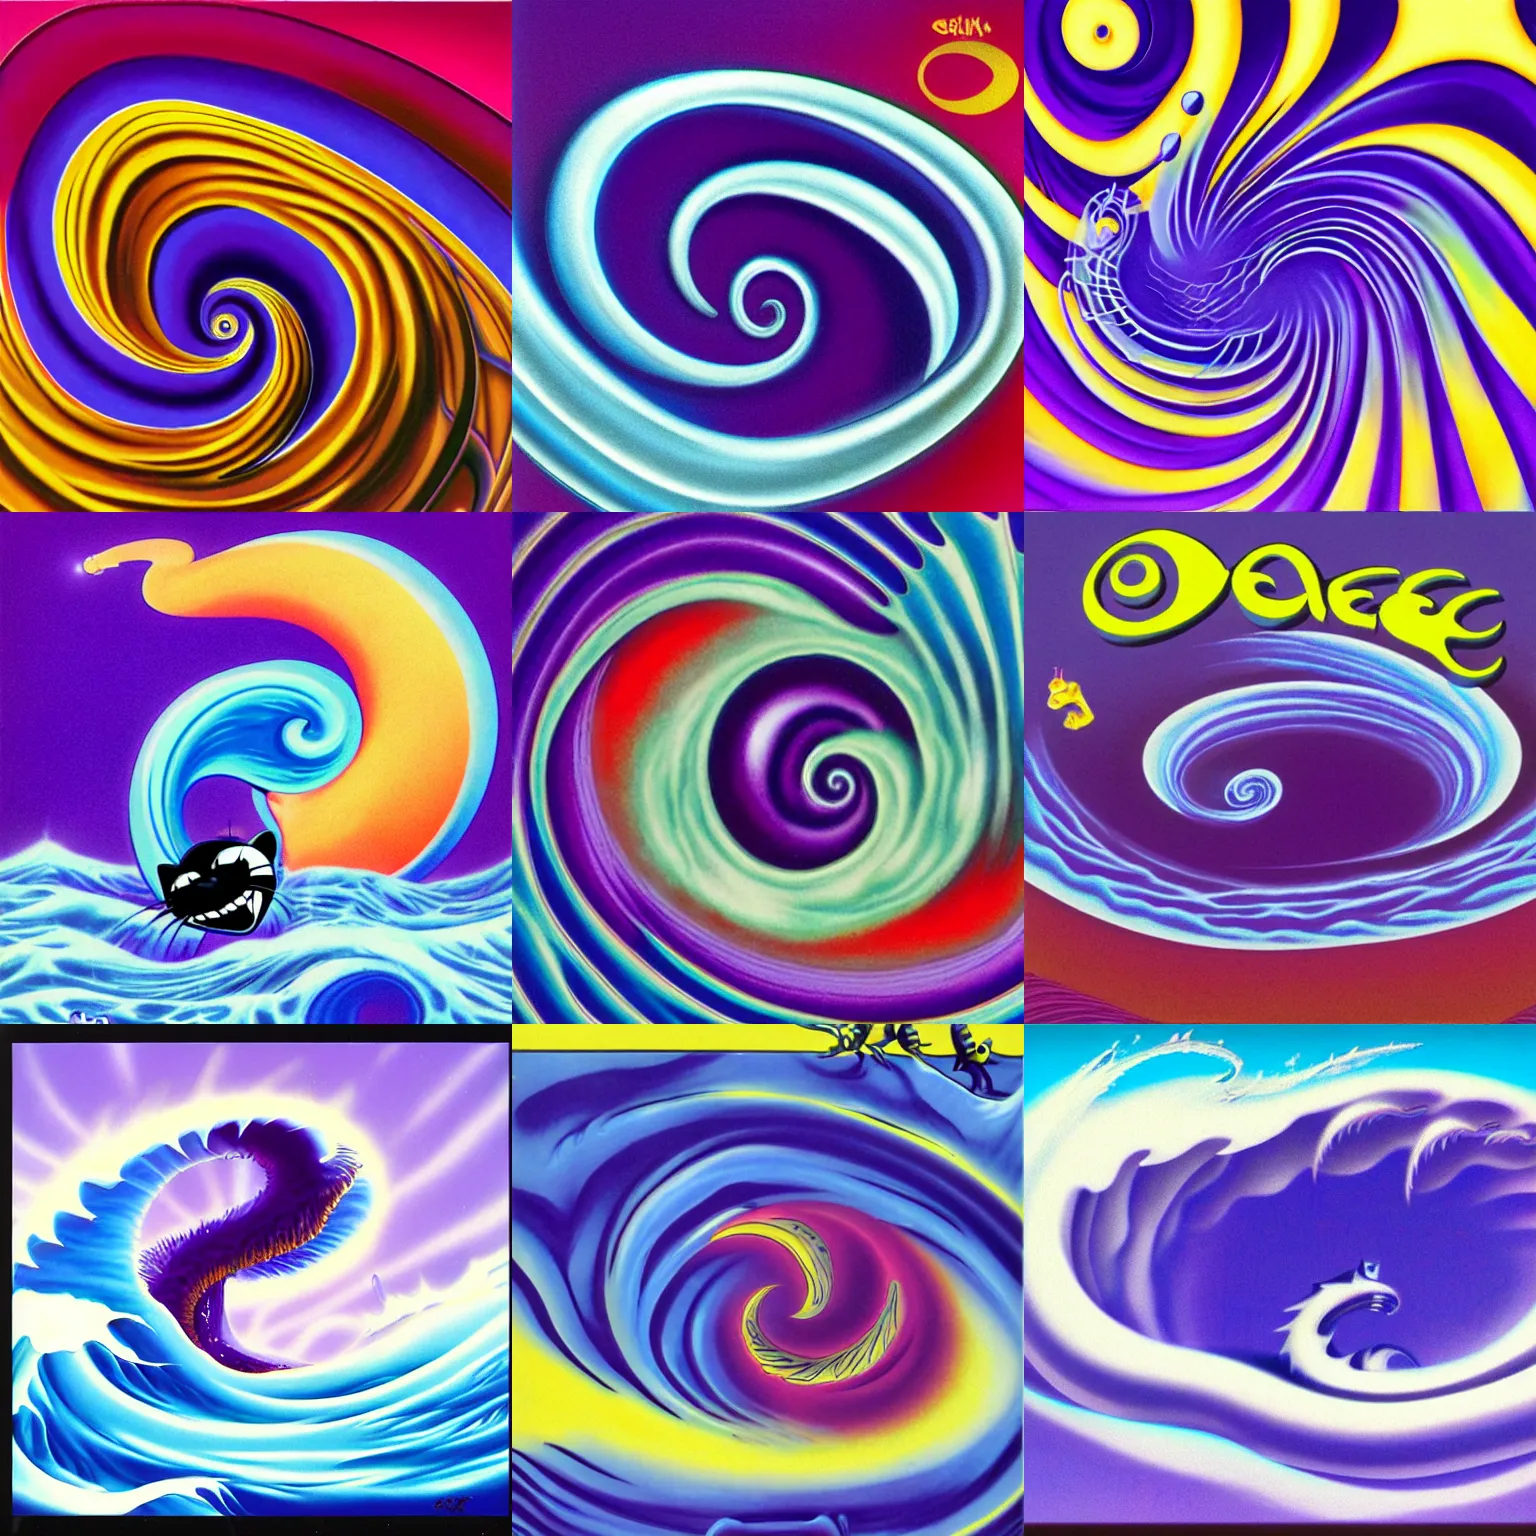 Prompt: surreal, sharp, detailed professional, high quality airbrush art album cover of a blue cresting ocean wave spiral in the shape of felix the cat, purple checkerboard background, 1990s 1992 Sega Genesis box art